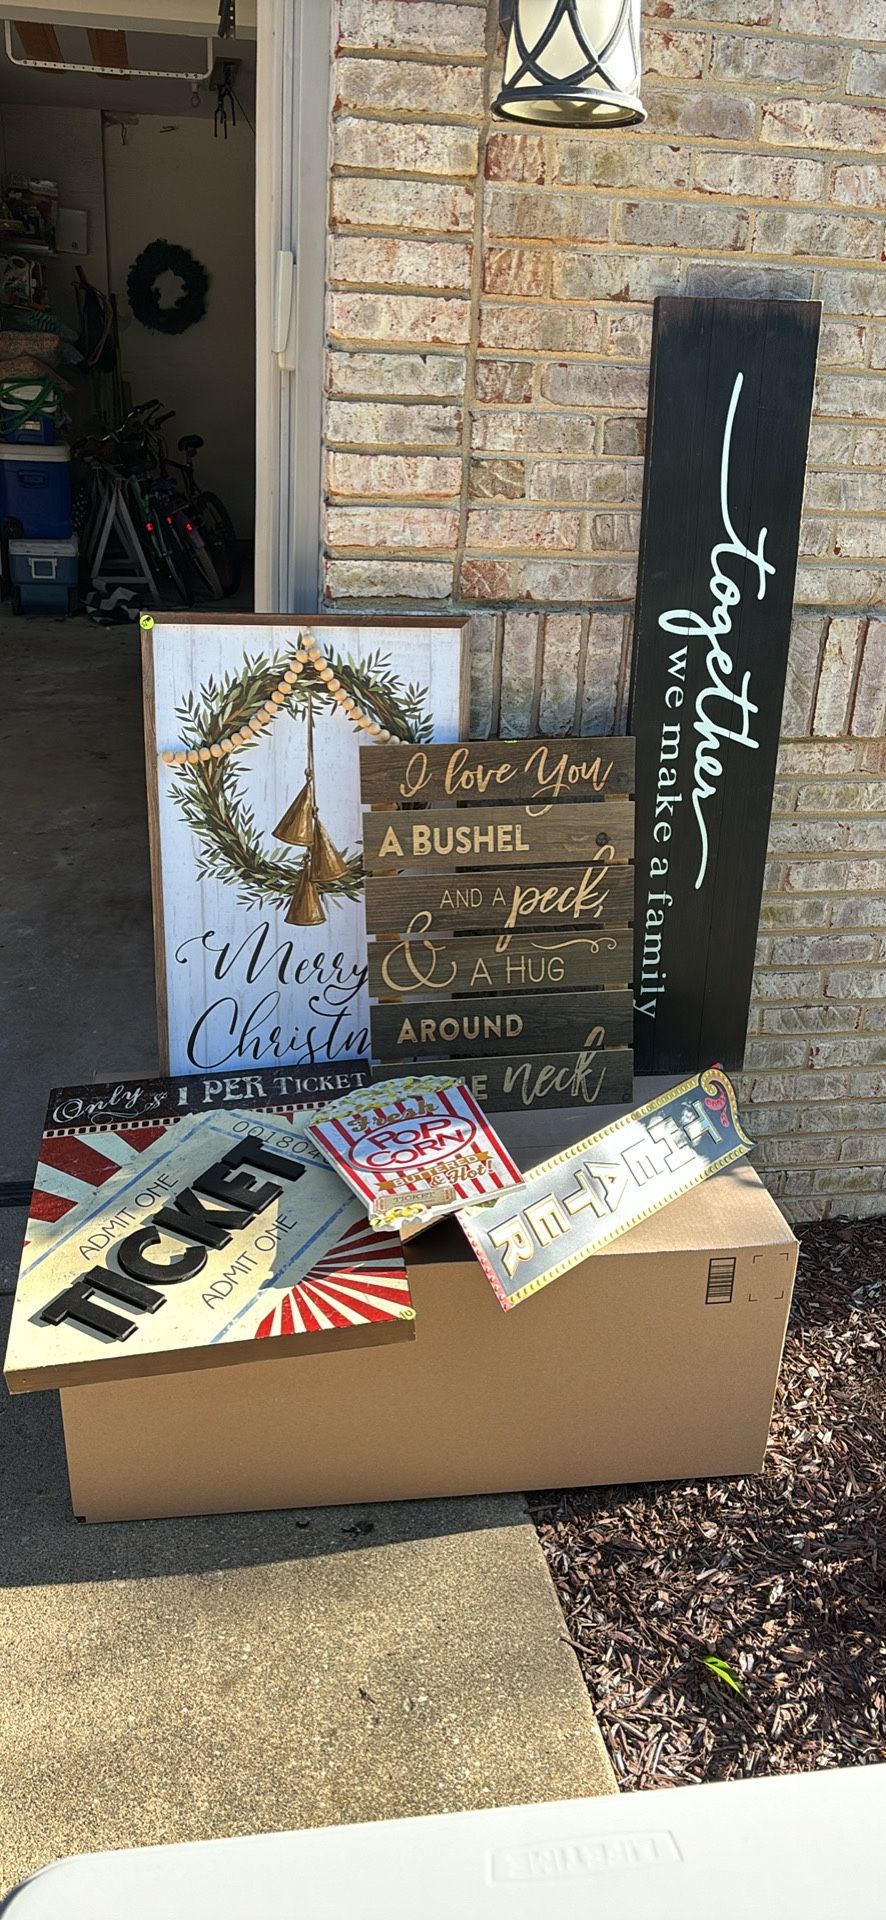 Home Decor Signs 